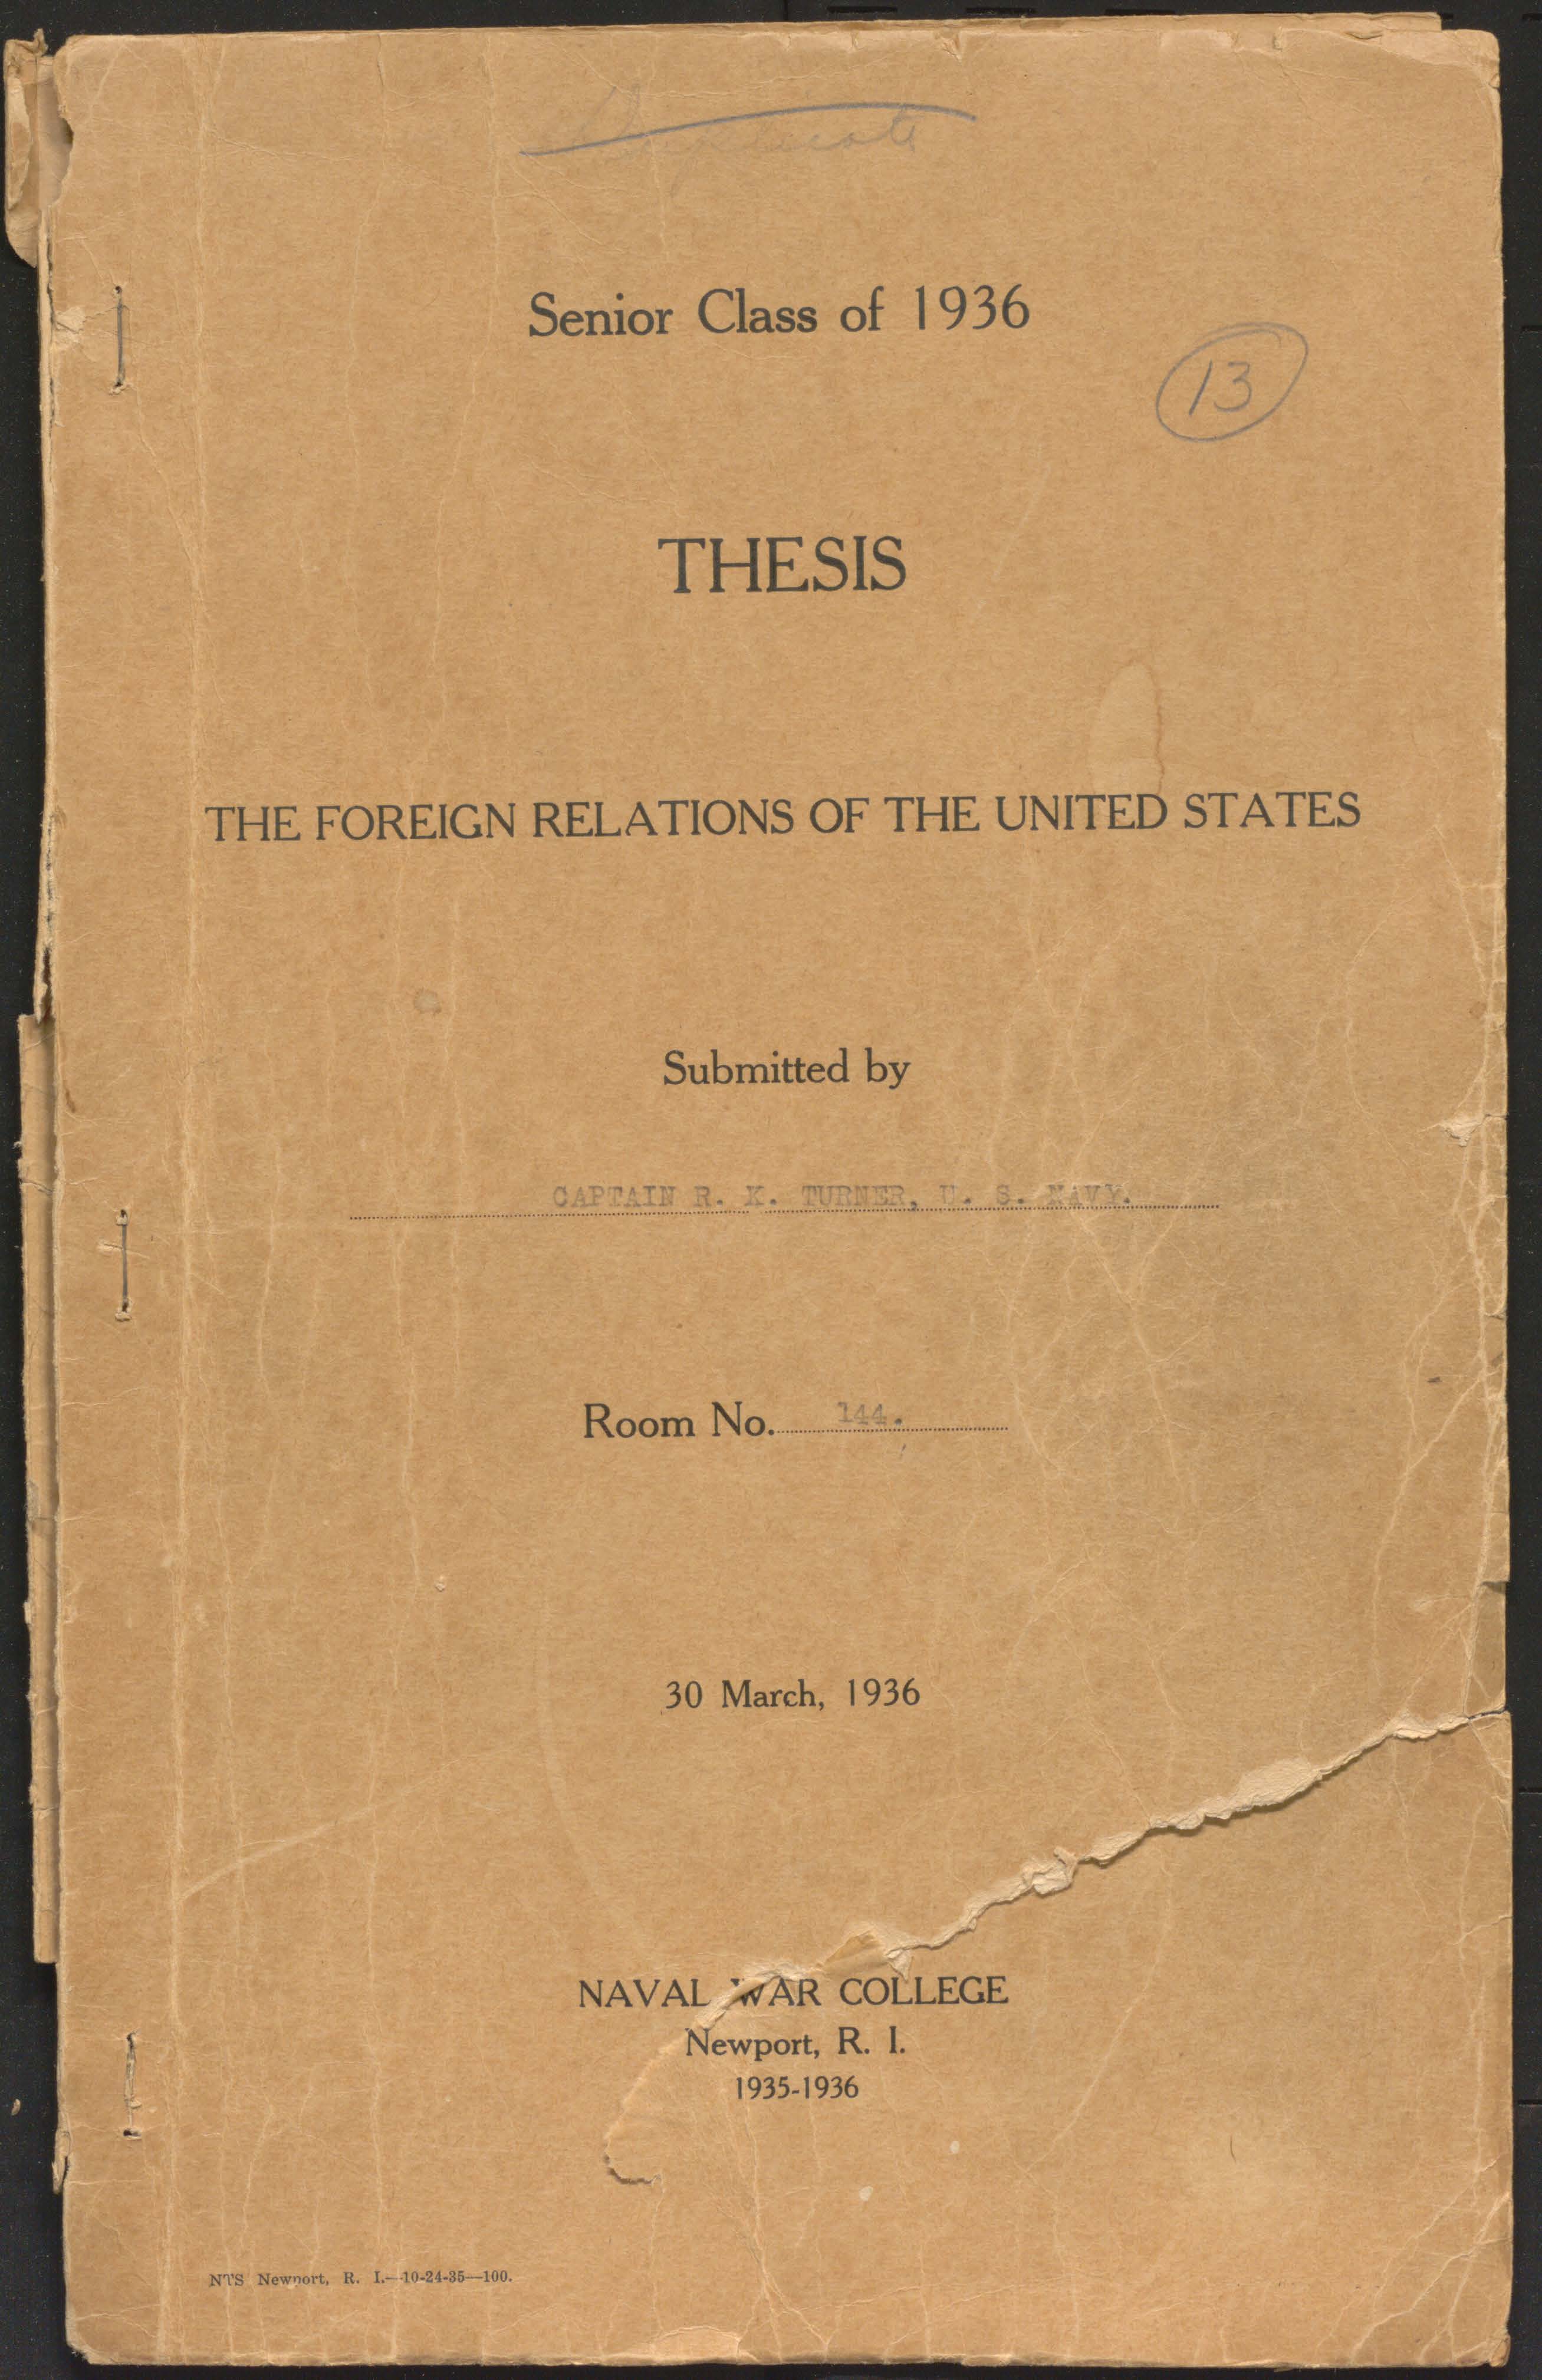 The Foreign Relations of the United States, R.K. Turner